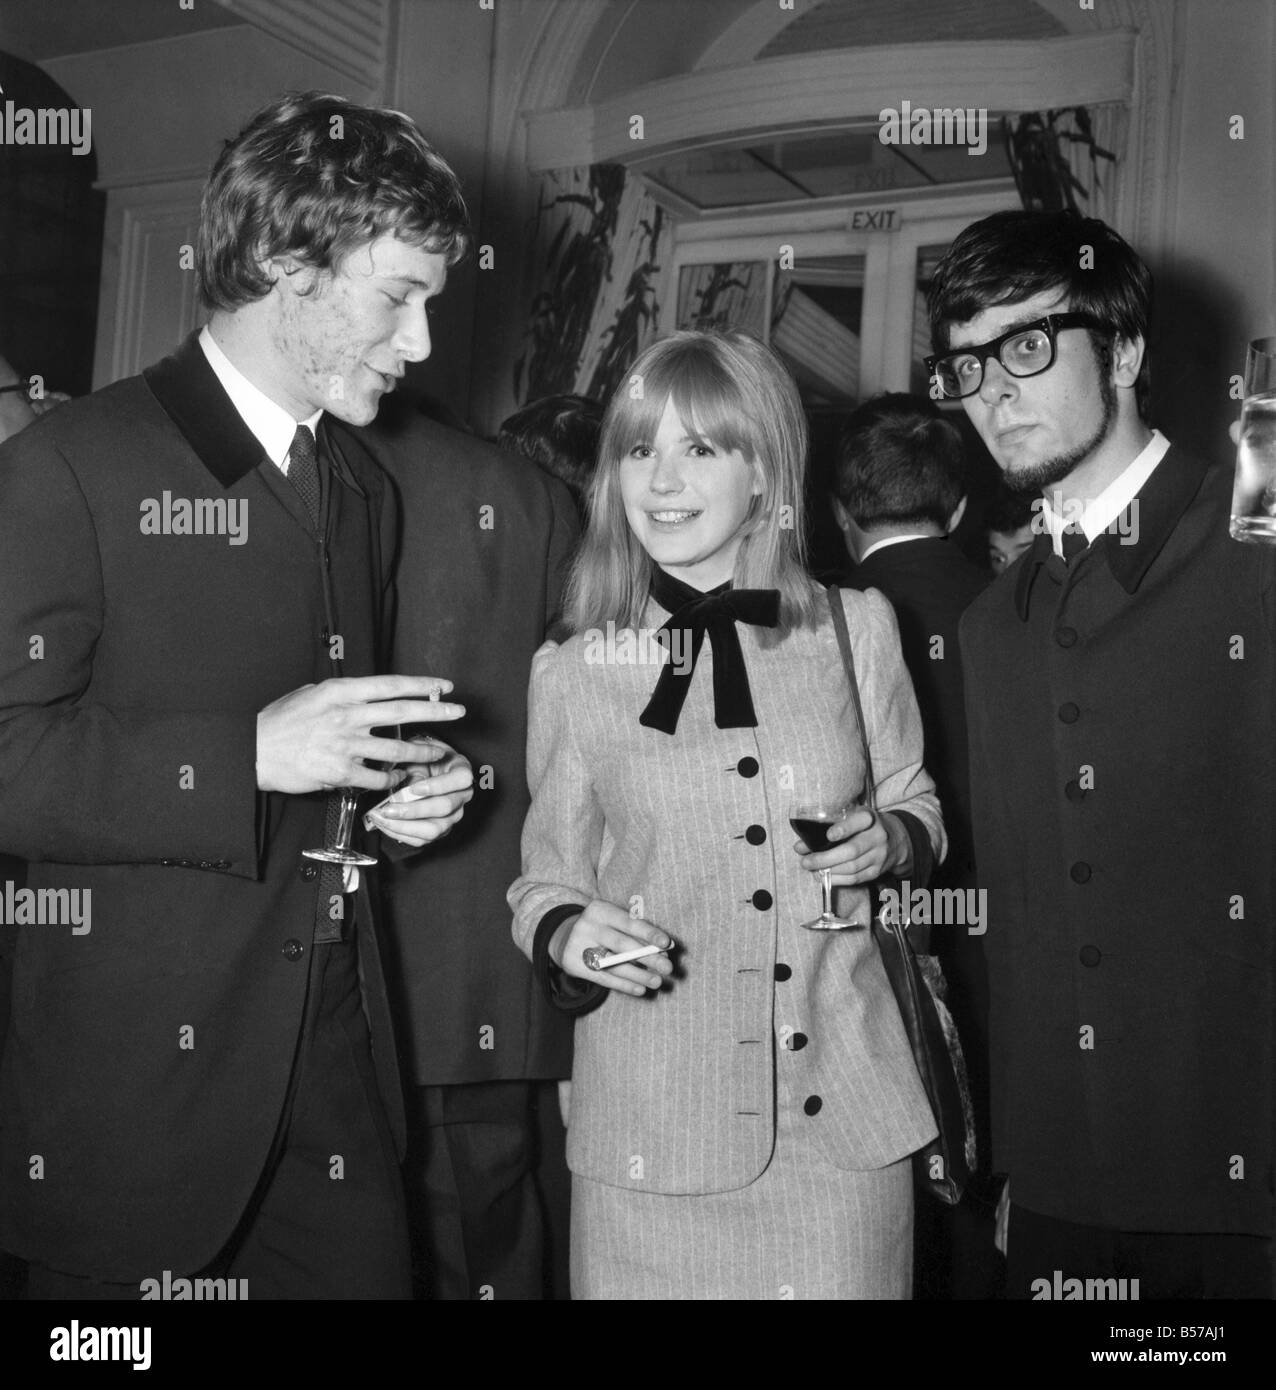 V. C. G. B. Luncheon: Paul Jones, Marie Anne and Manfred Mann. September 1964 S07988-008 Variety Club of Great Britain. Stock Photo